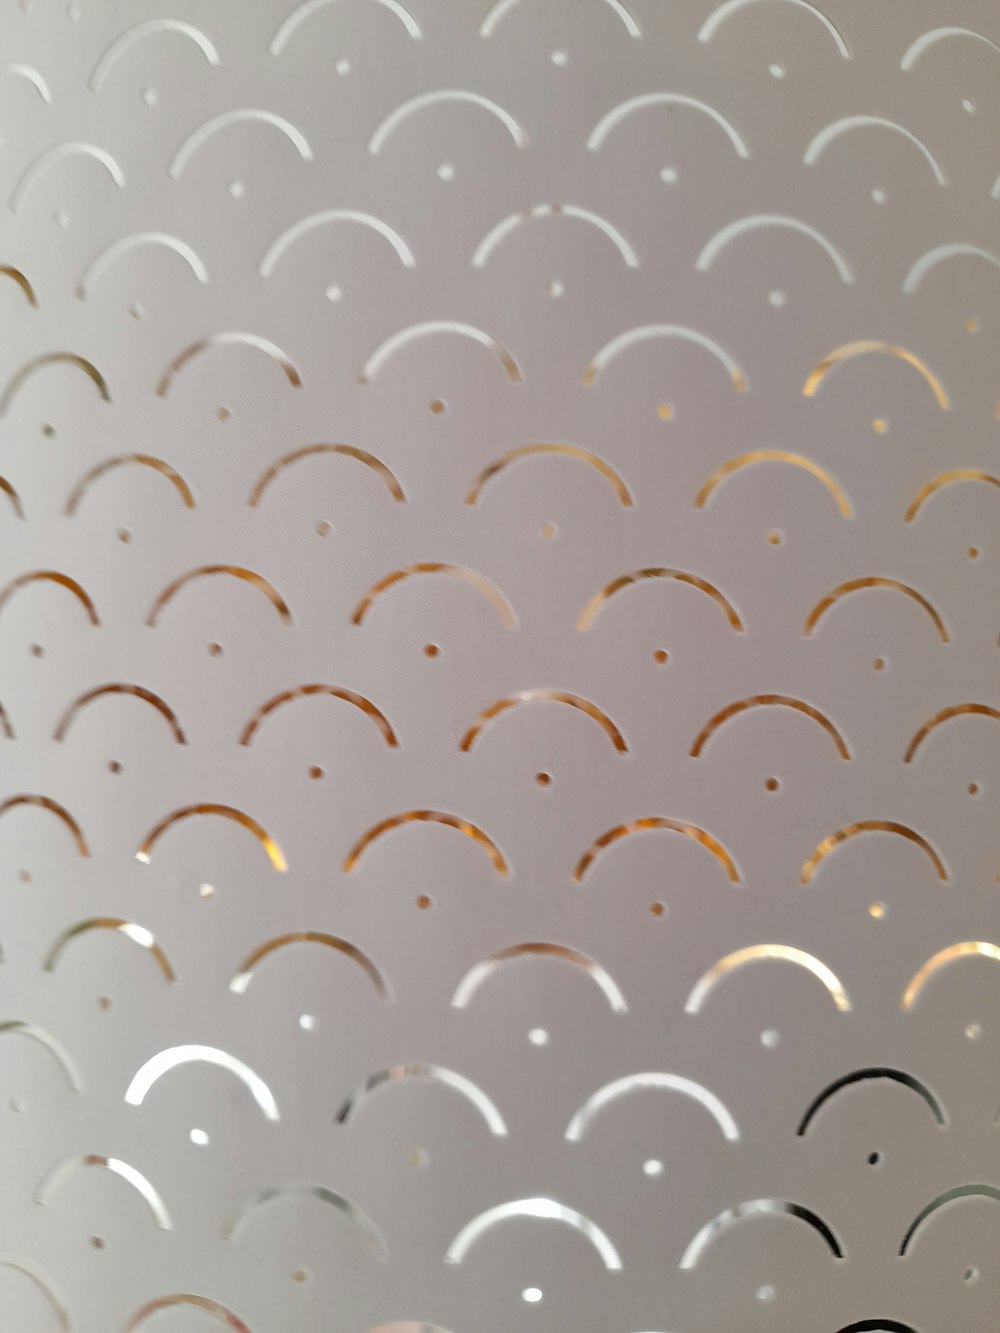 a close up of a metal surface with circles